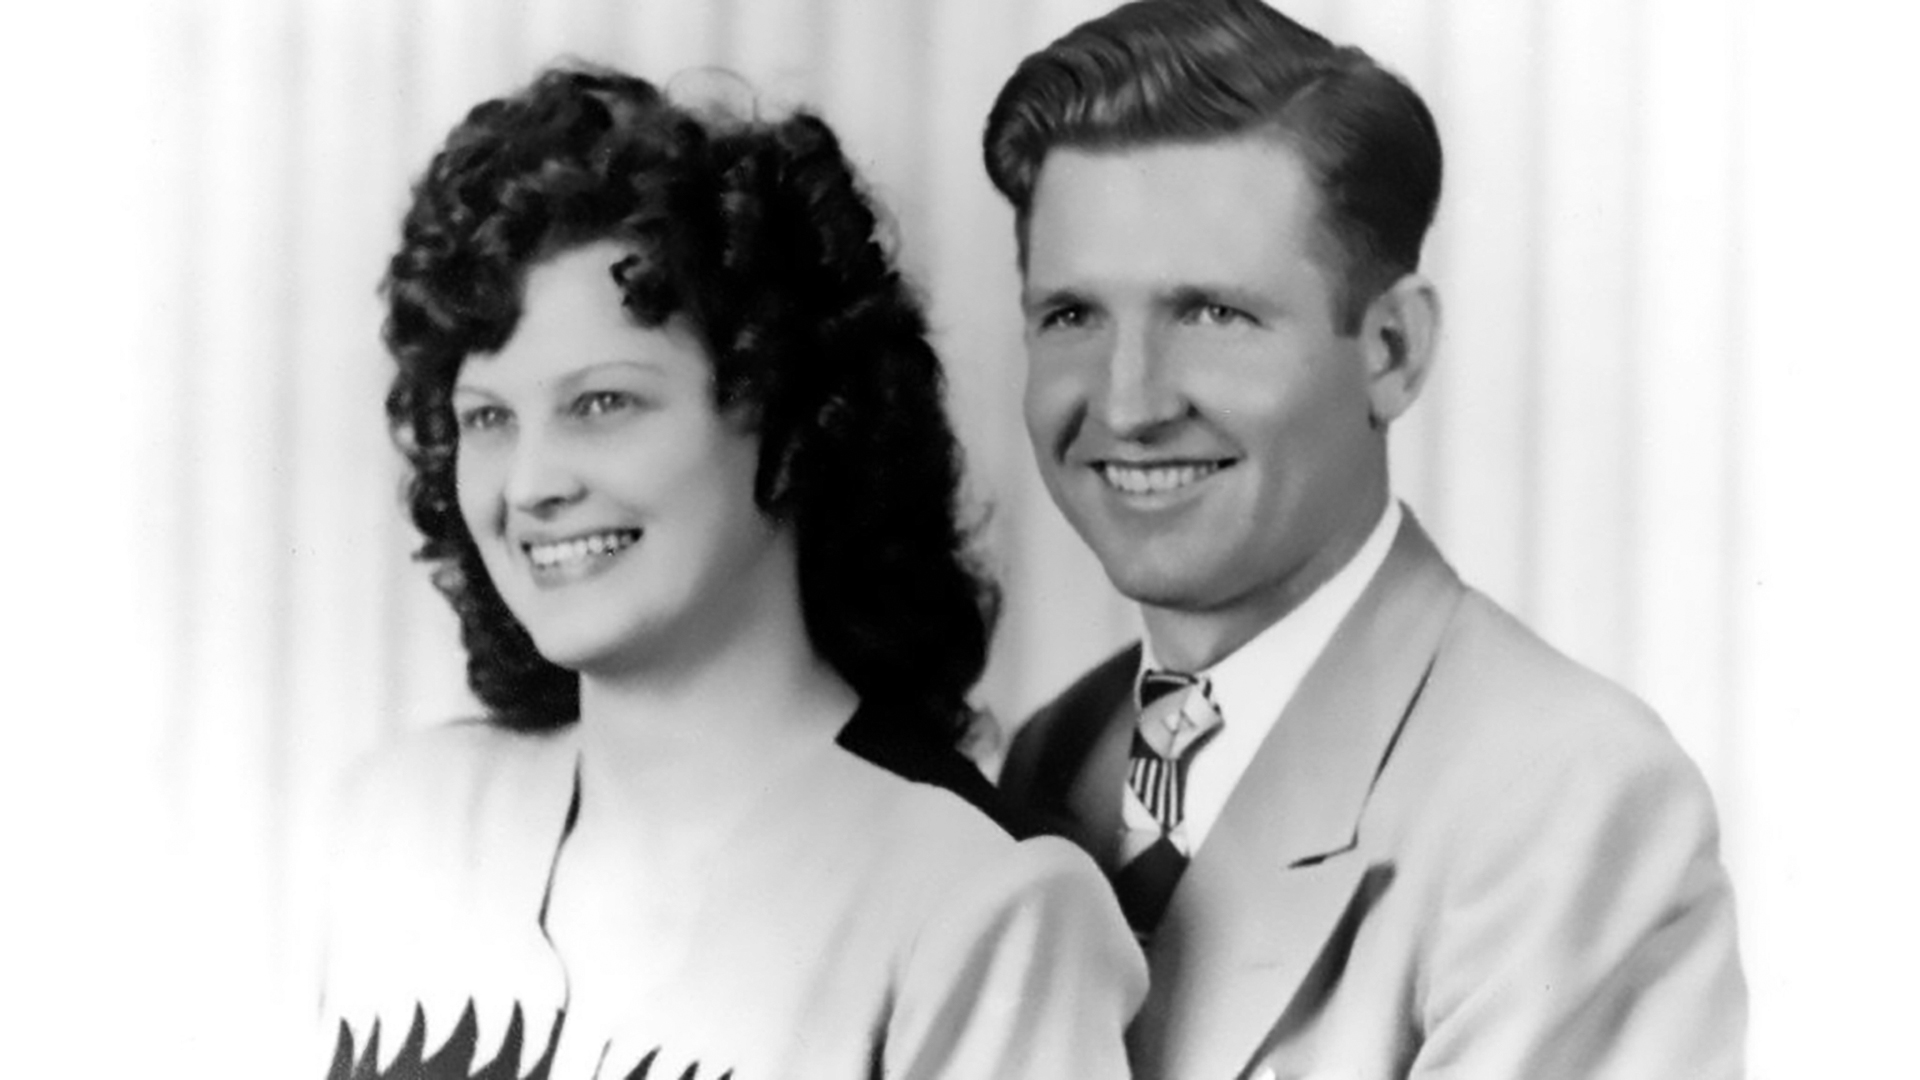 Fern and Ray Jones in 1947